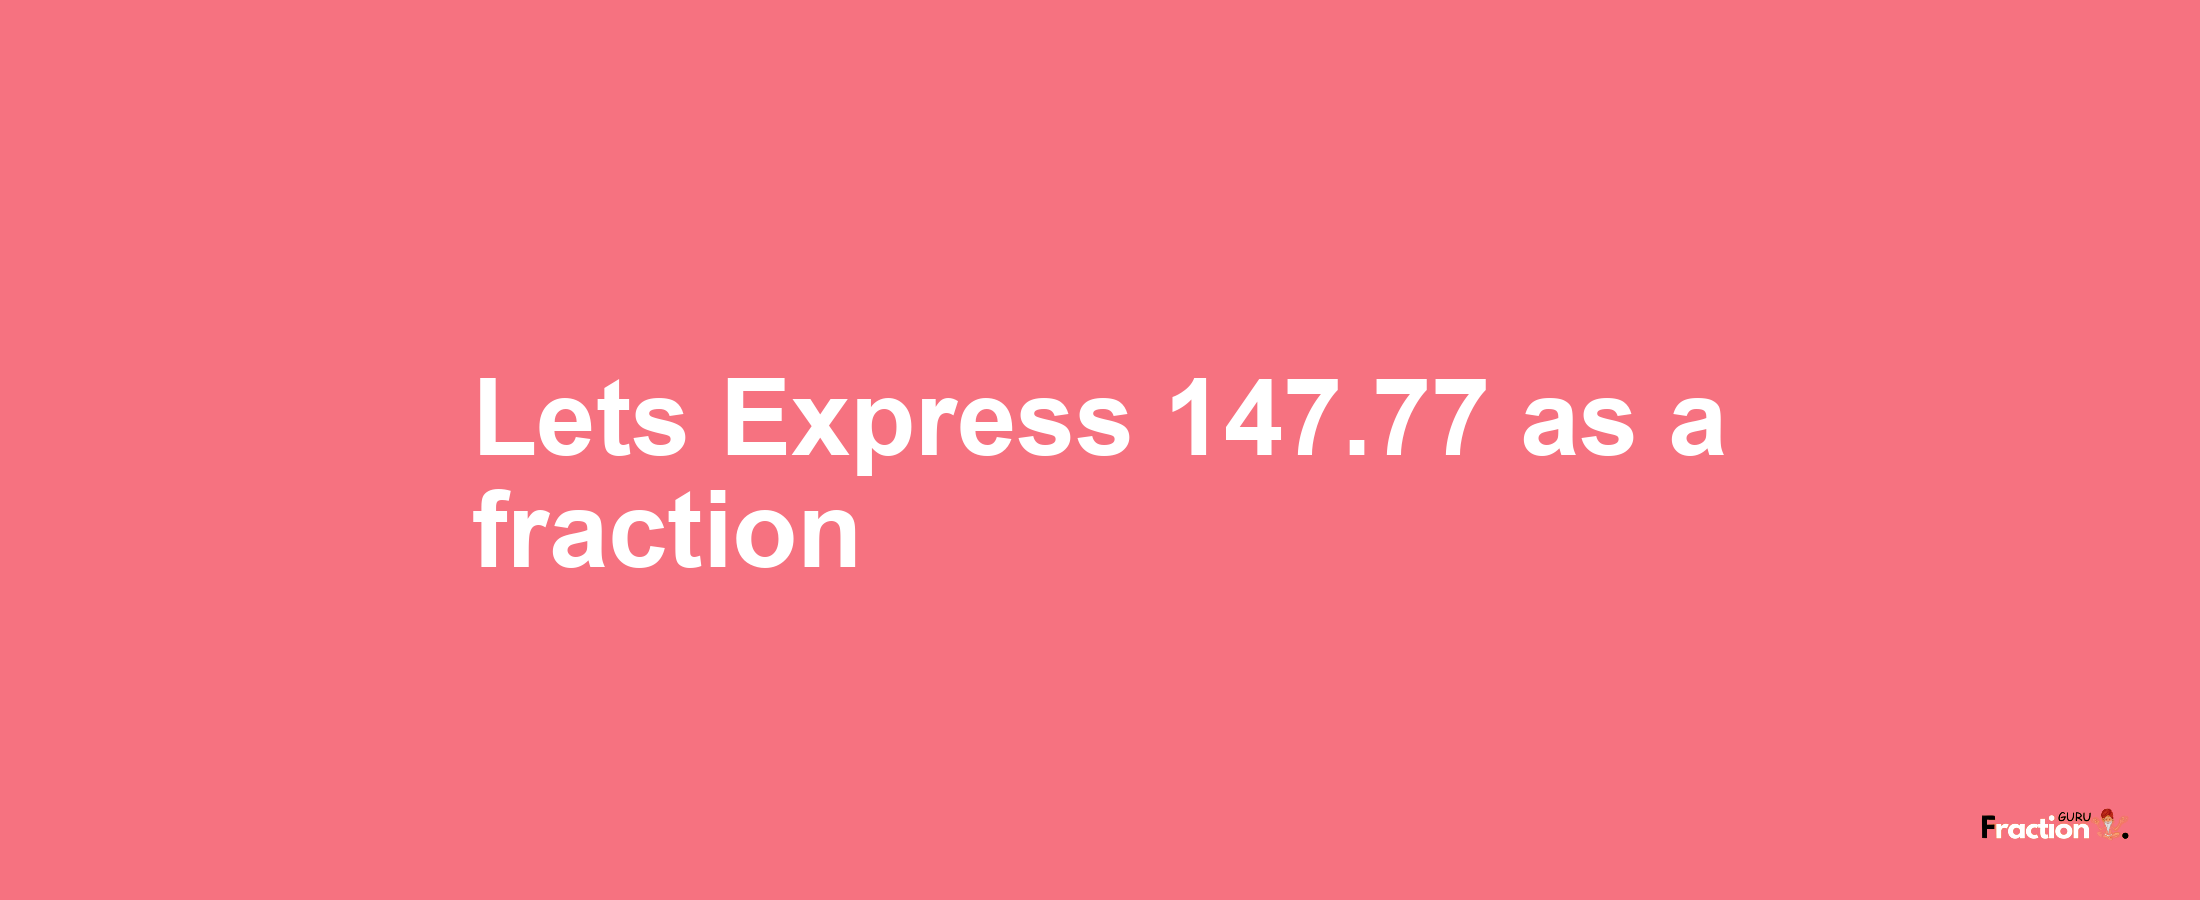 Lets Express 147.77 as afraction